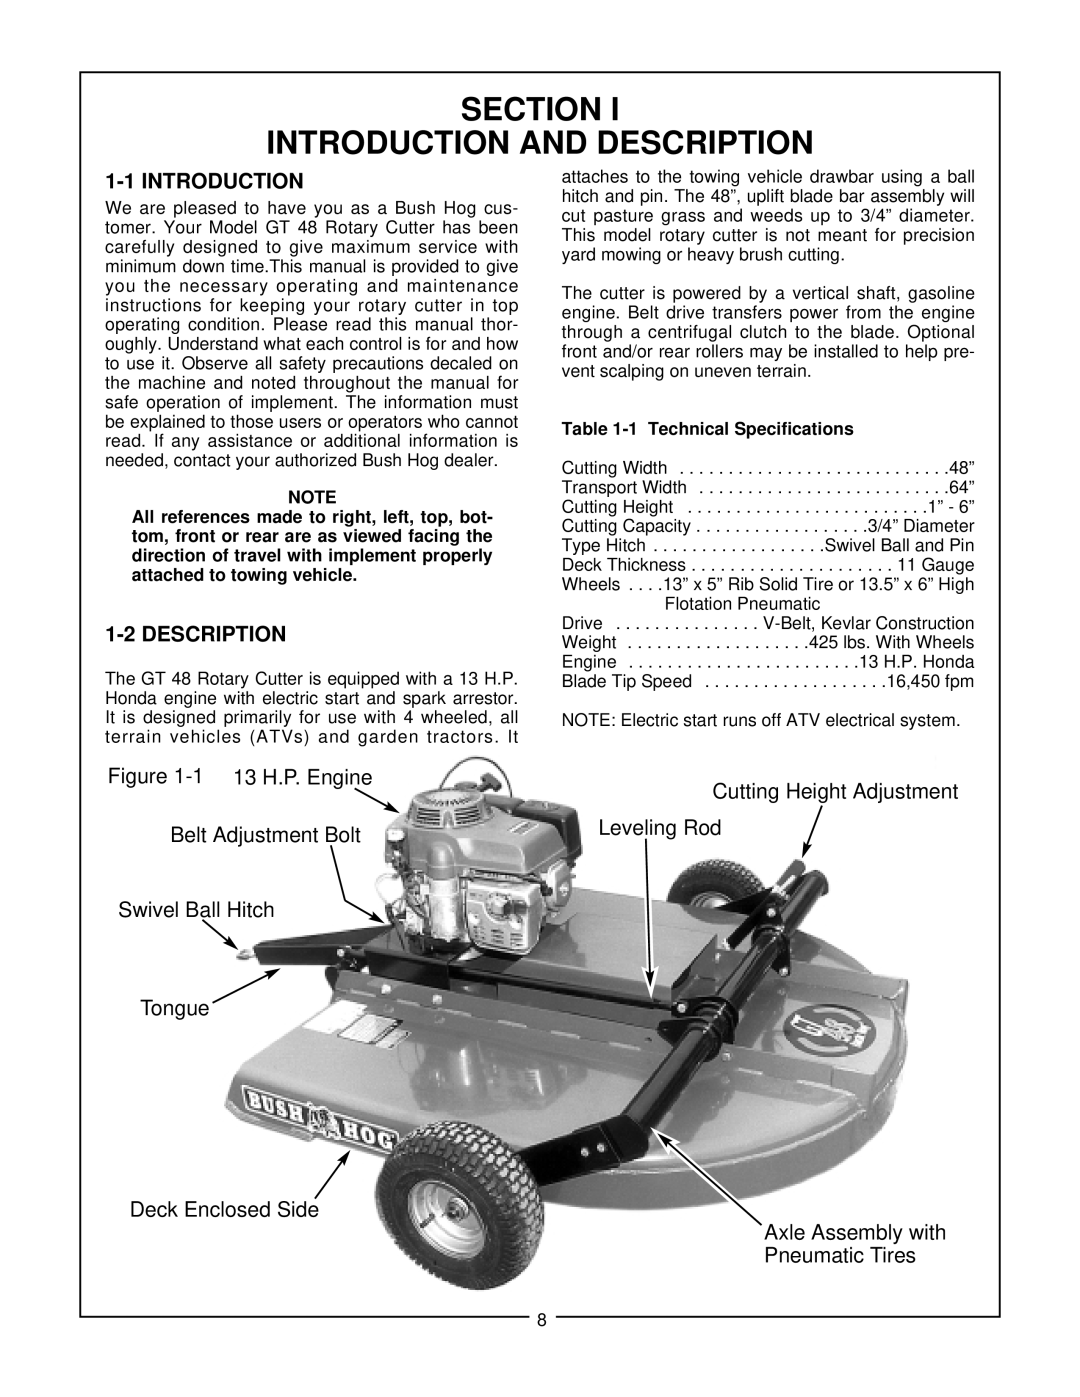 Bush Hog GT 48 manual Section Introduction And Description, 1 Technical Specifications 